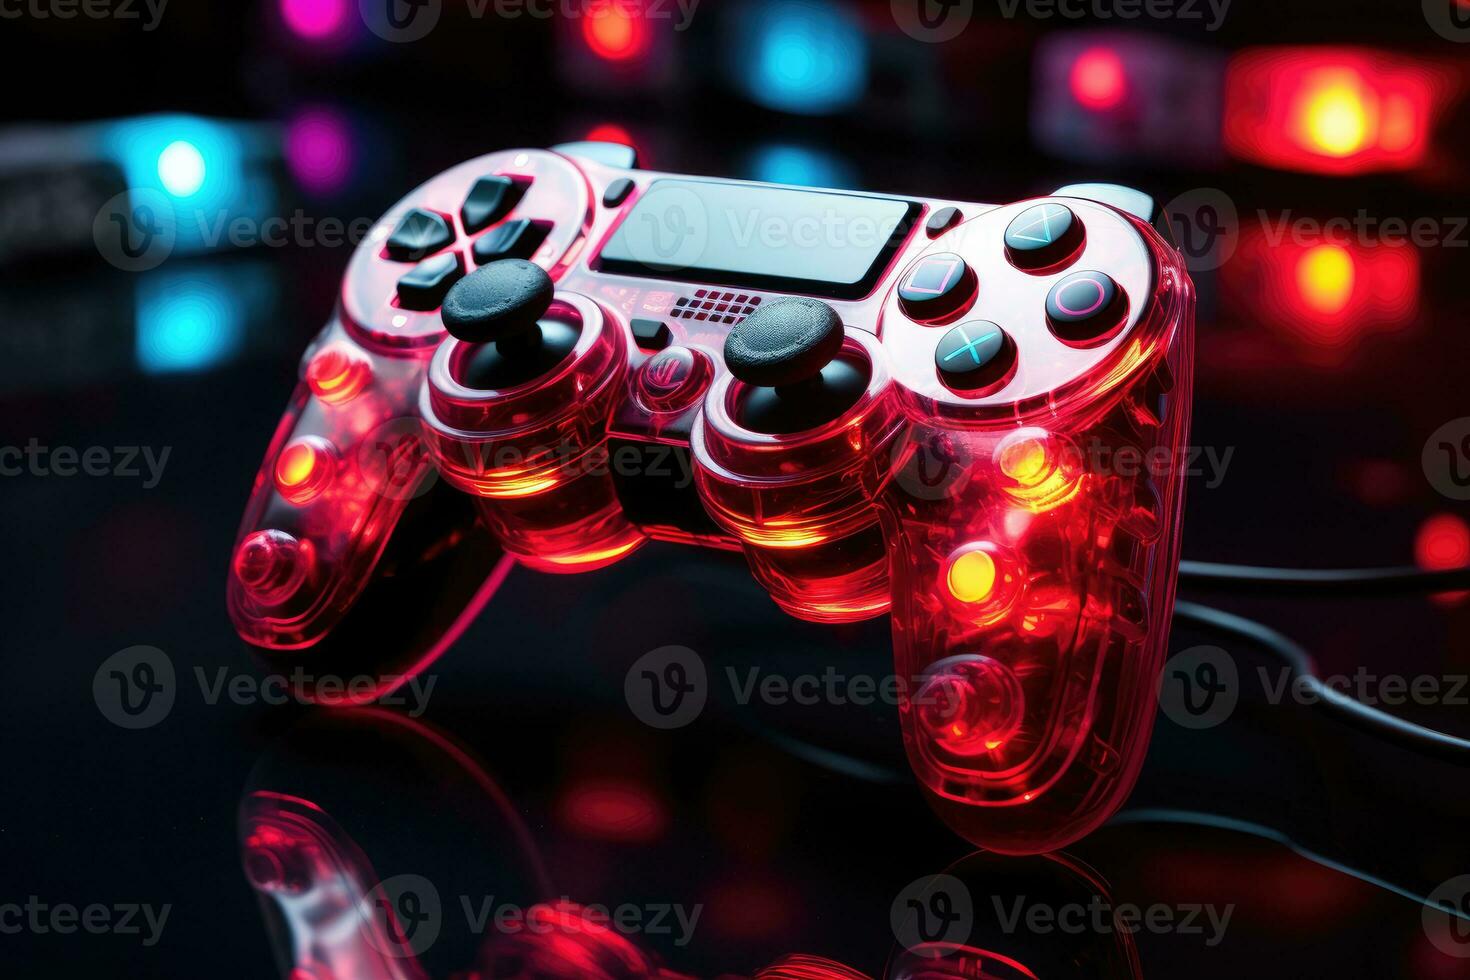 Neon Gamepad Glowing Gamepad Sign On Black Background Colorful And Bright  Gaming Joystick Symbol Stock Illustration - Download Image Now - iStock